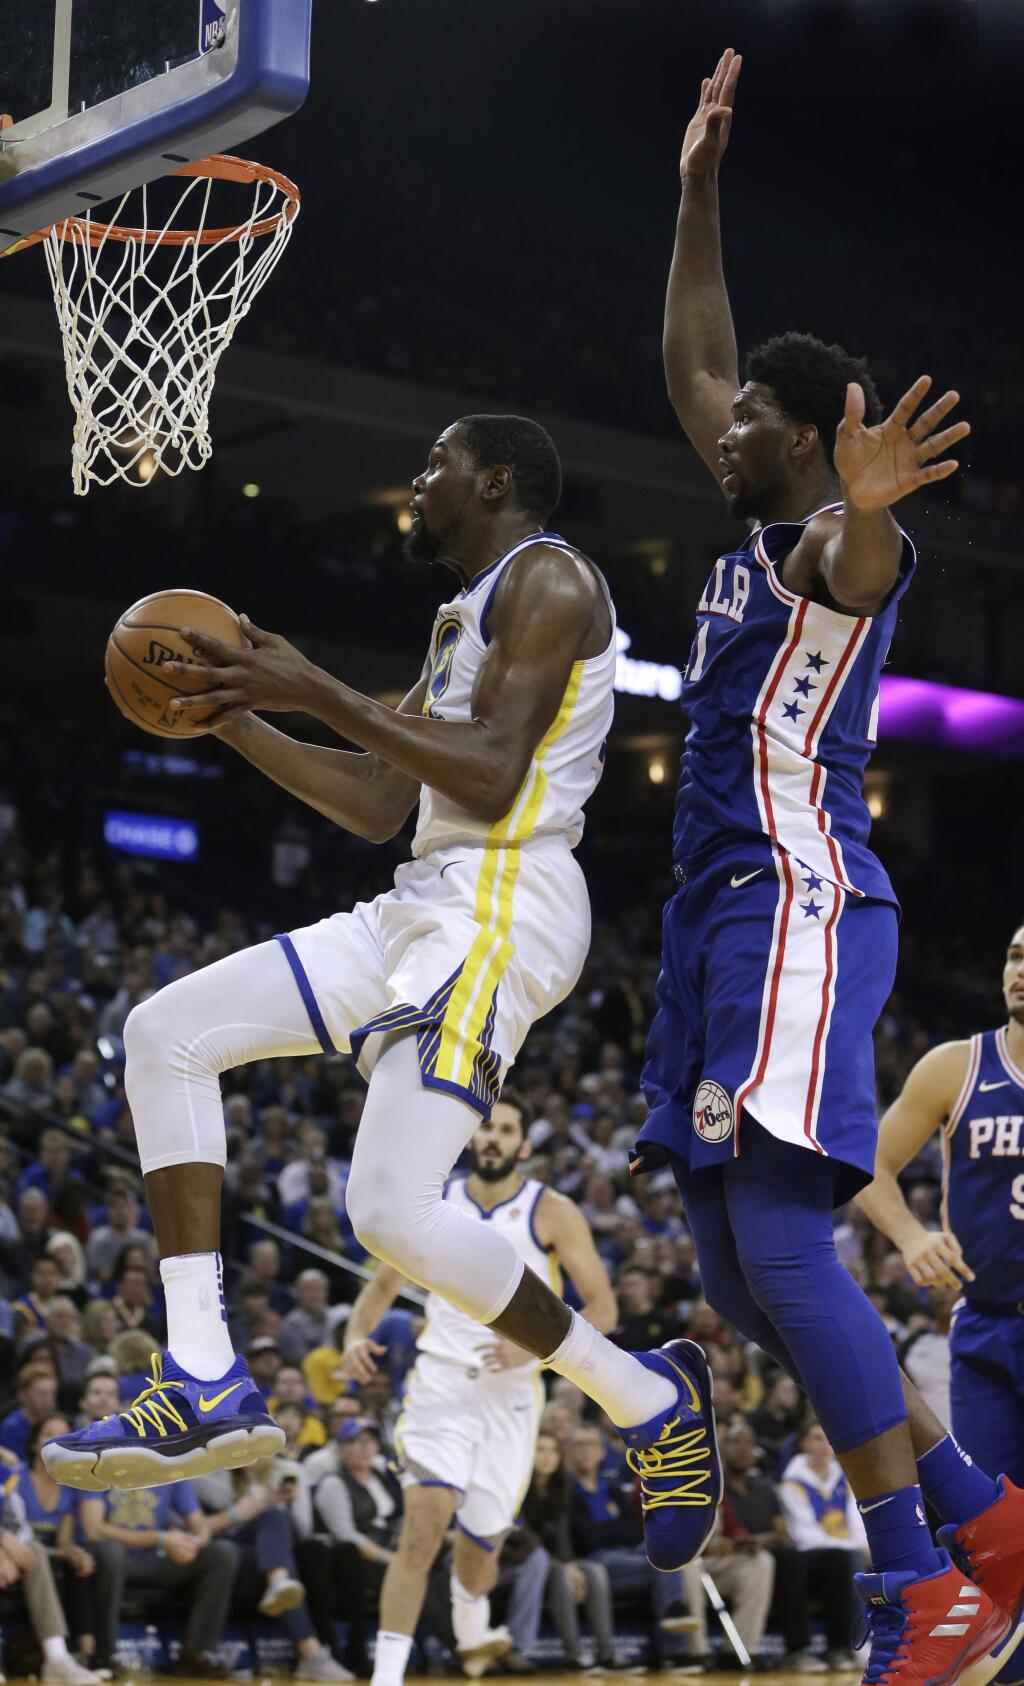 Golden State Warriors' Kevin Durant, left, lays up a shot past Philadelphia 76ers' Joel Embiid during the first half of an NBA basketball game Saturday, Nov. 11, 2017, in Oakland, Calif. (AP Photo/Ben Margot)